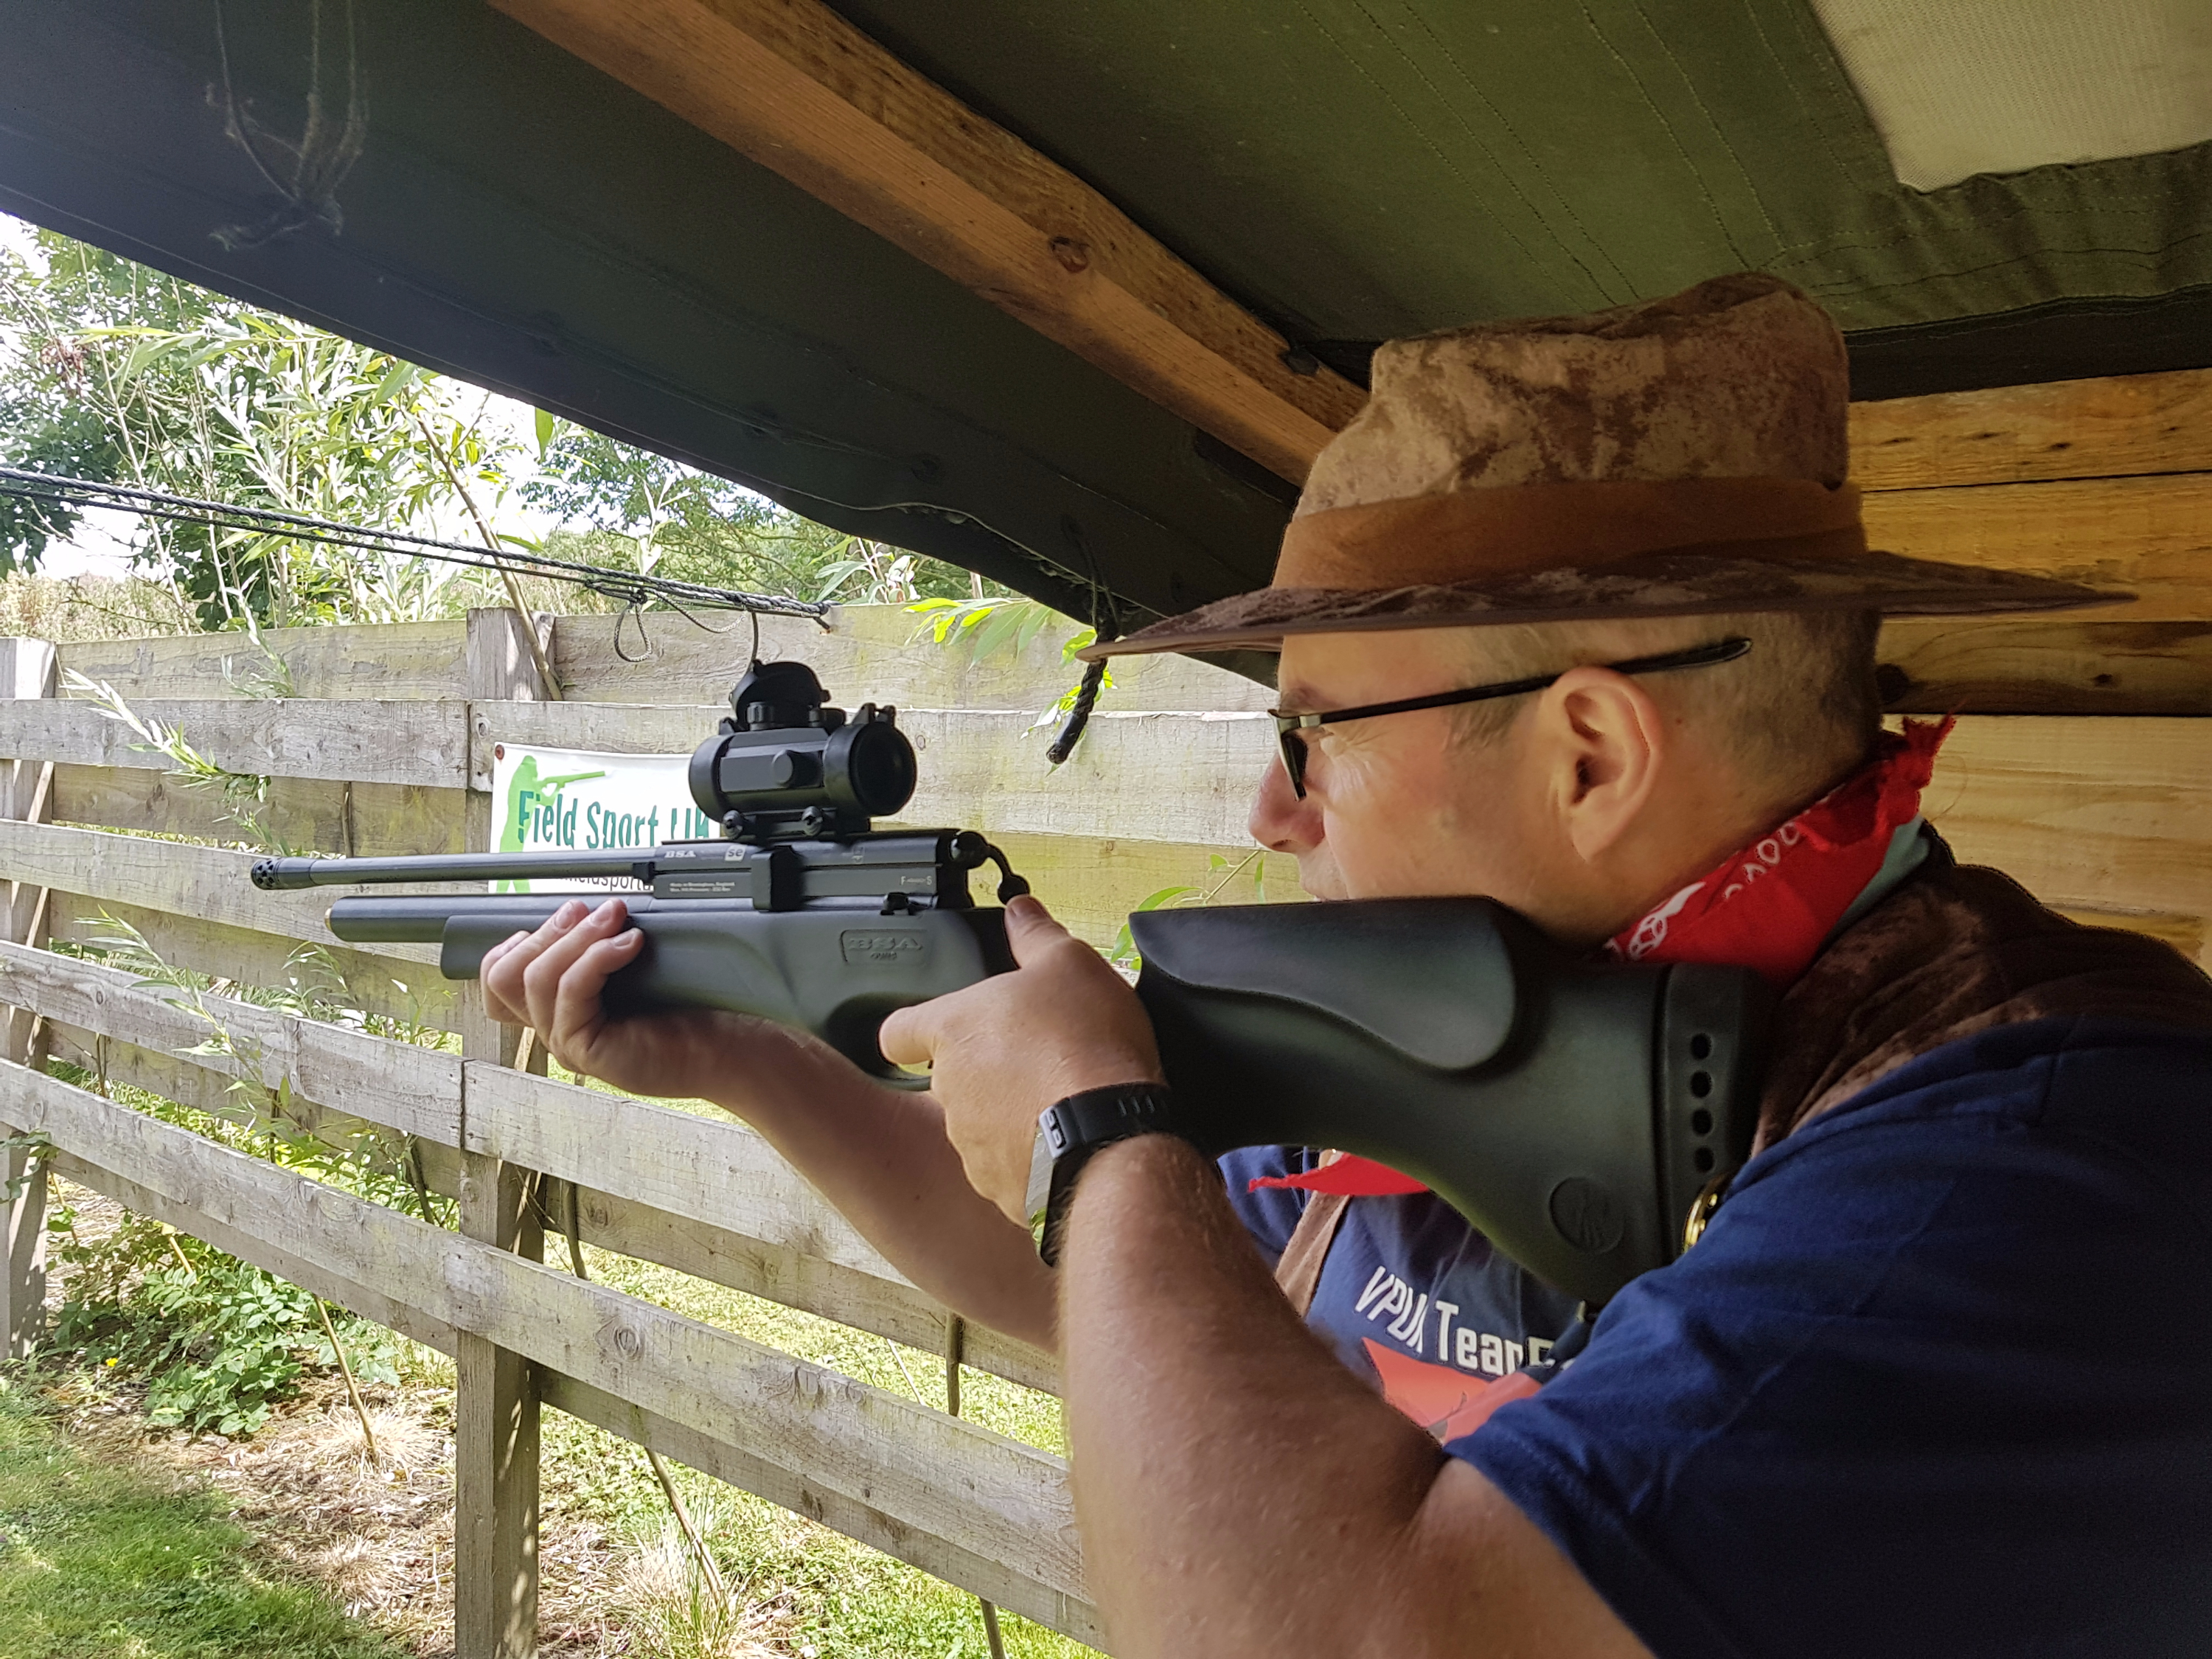 Moving Target Air Rifle Shooting  Experience Field Sport UK